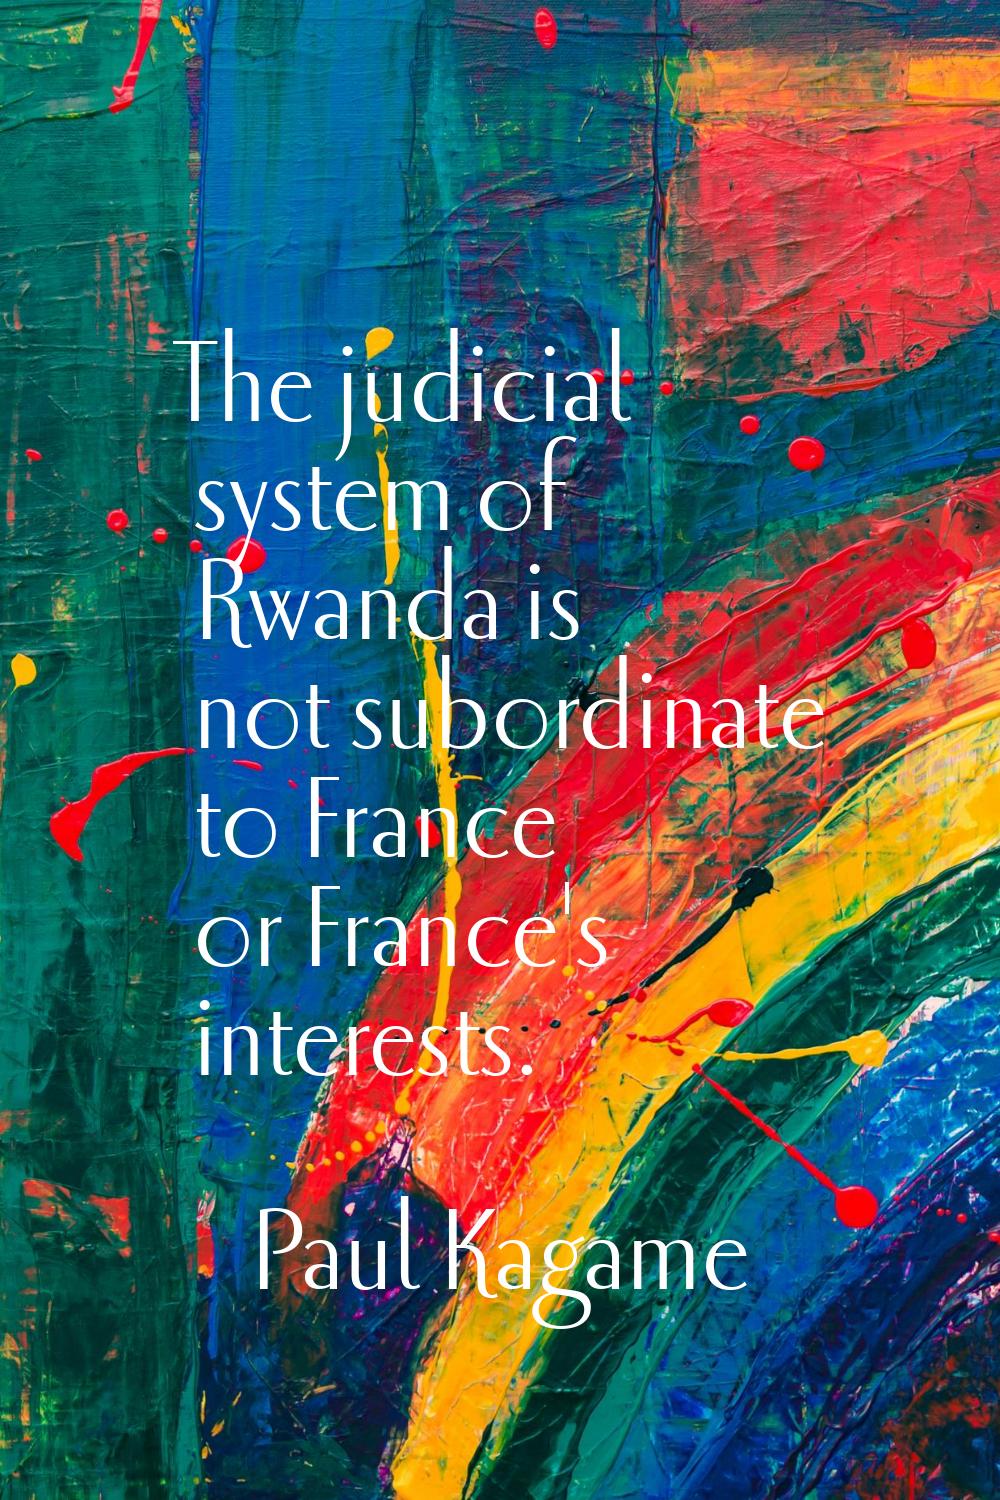 The judicial system of Rwanda is not subordinate to France or France's interests.